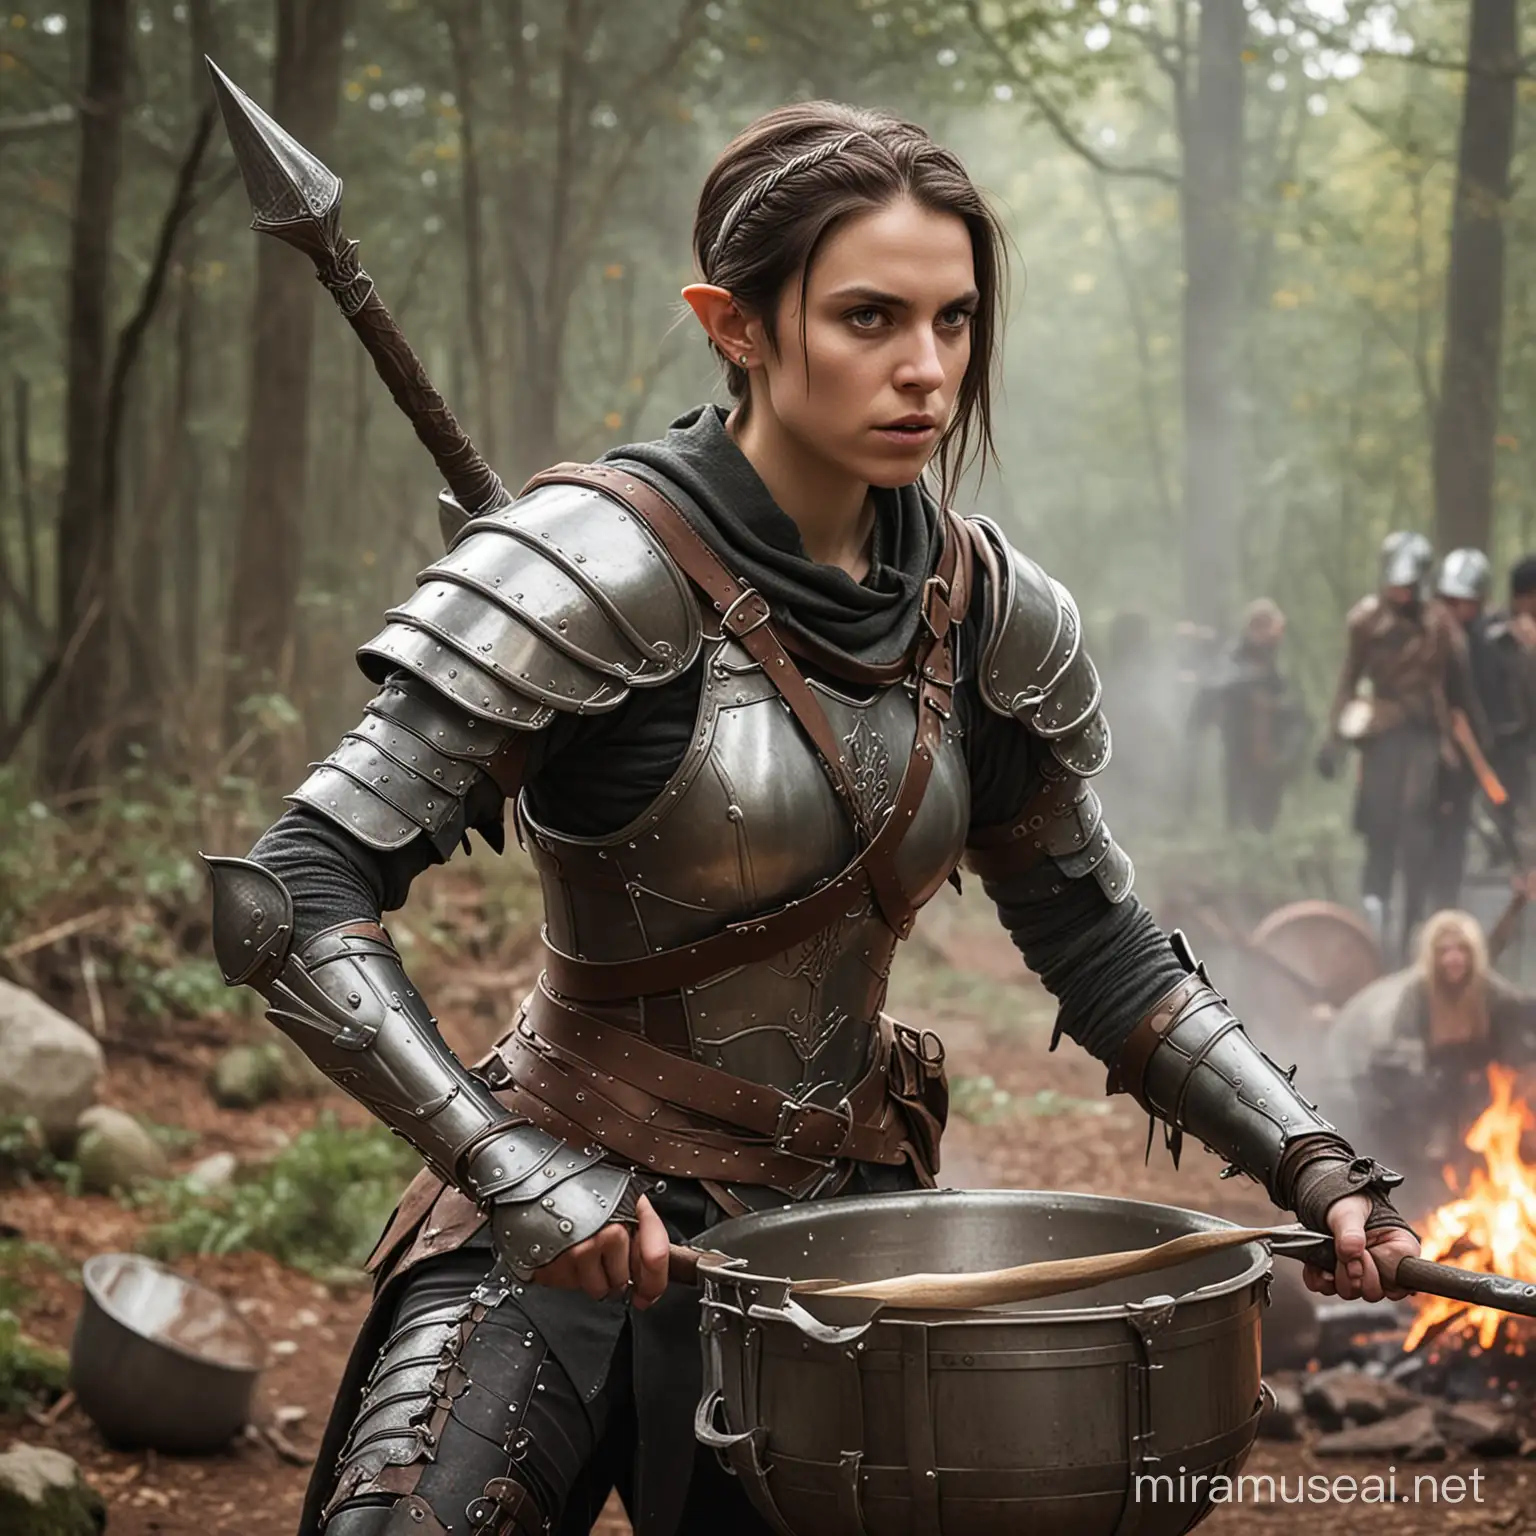 A genderqueer half-elf wearing armor and fighting a battle with a large spoon and wearing metal cooking pot